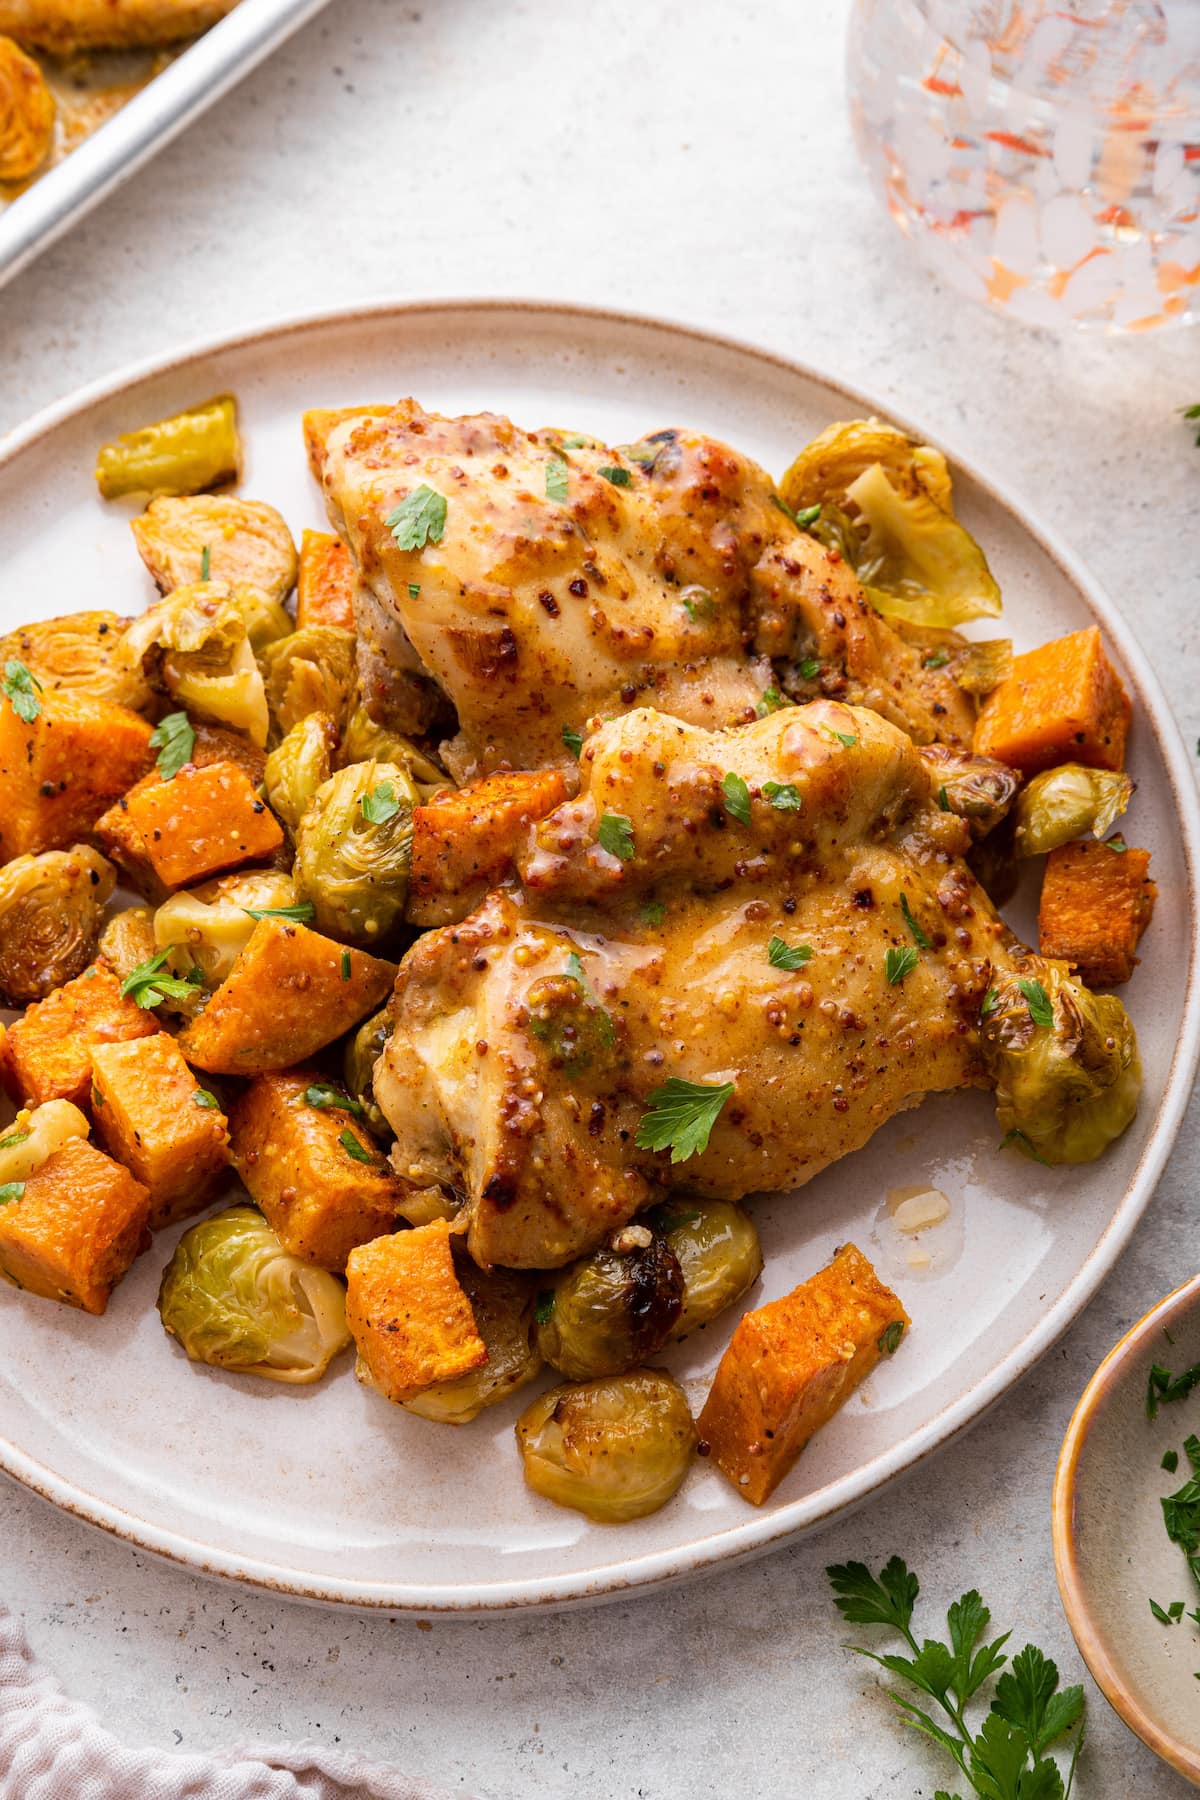 Honey mustard chicken sheet pan meal with roasted vegetables on a large plate.